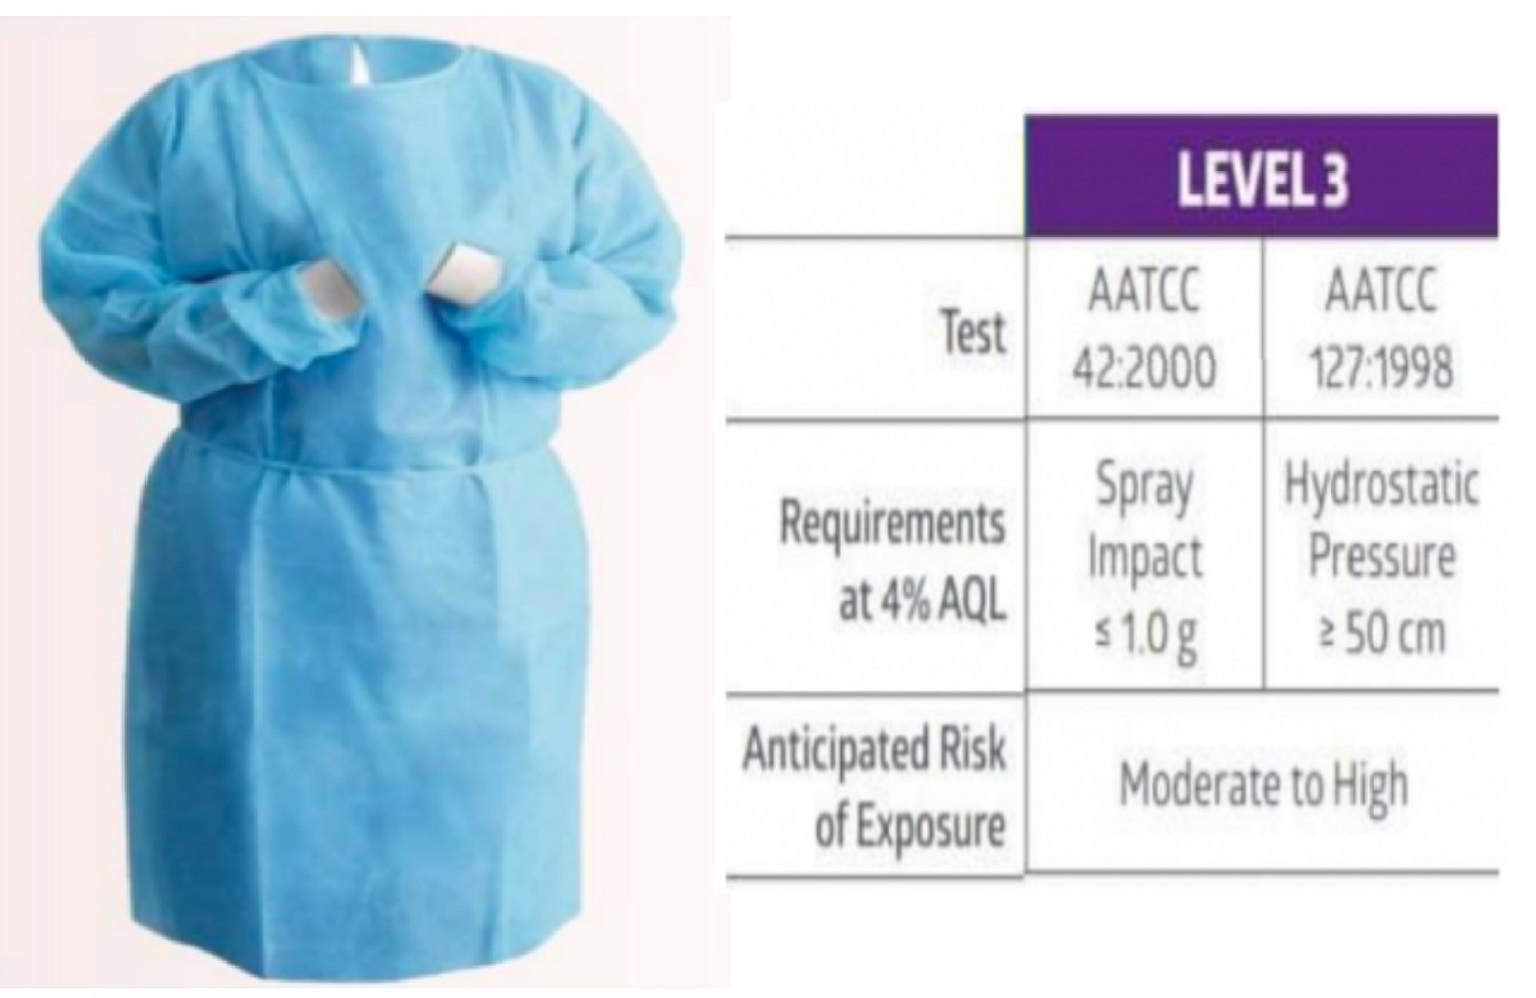 Non- Isolation Gown (Level 3)